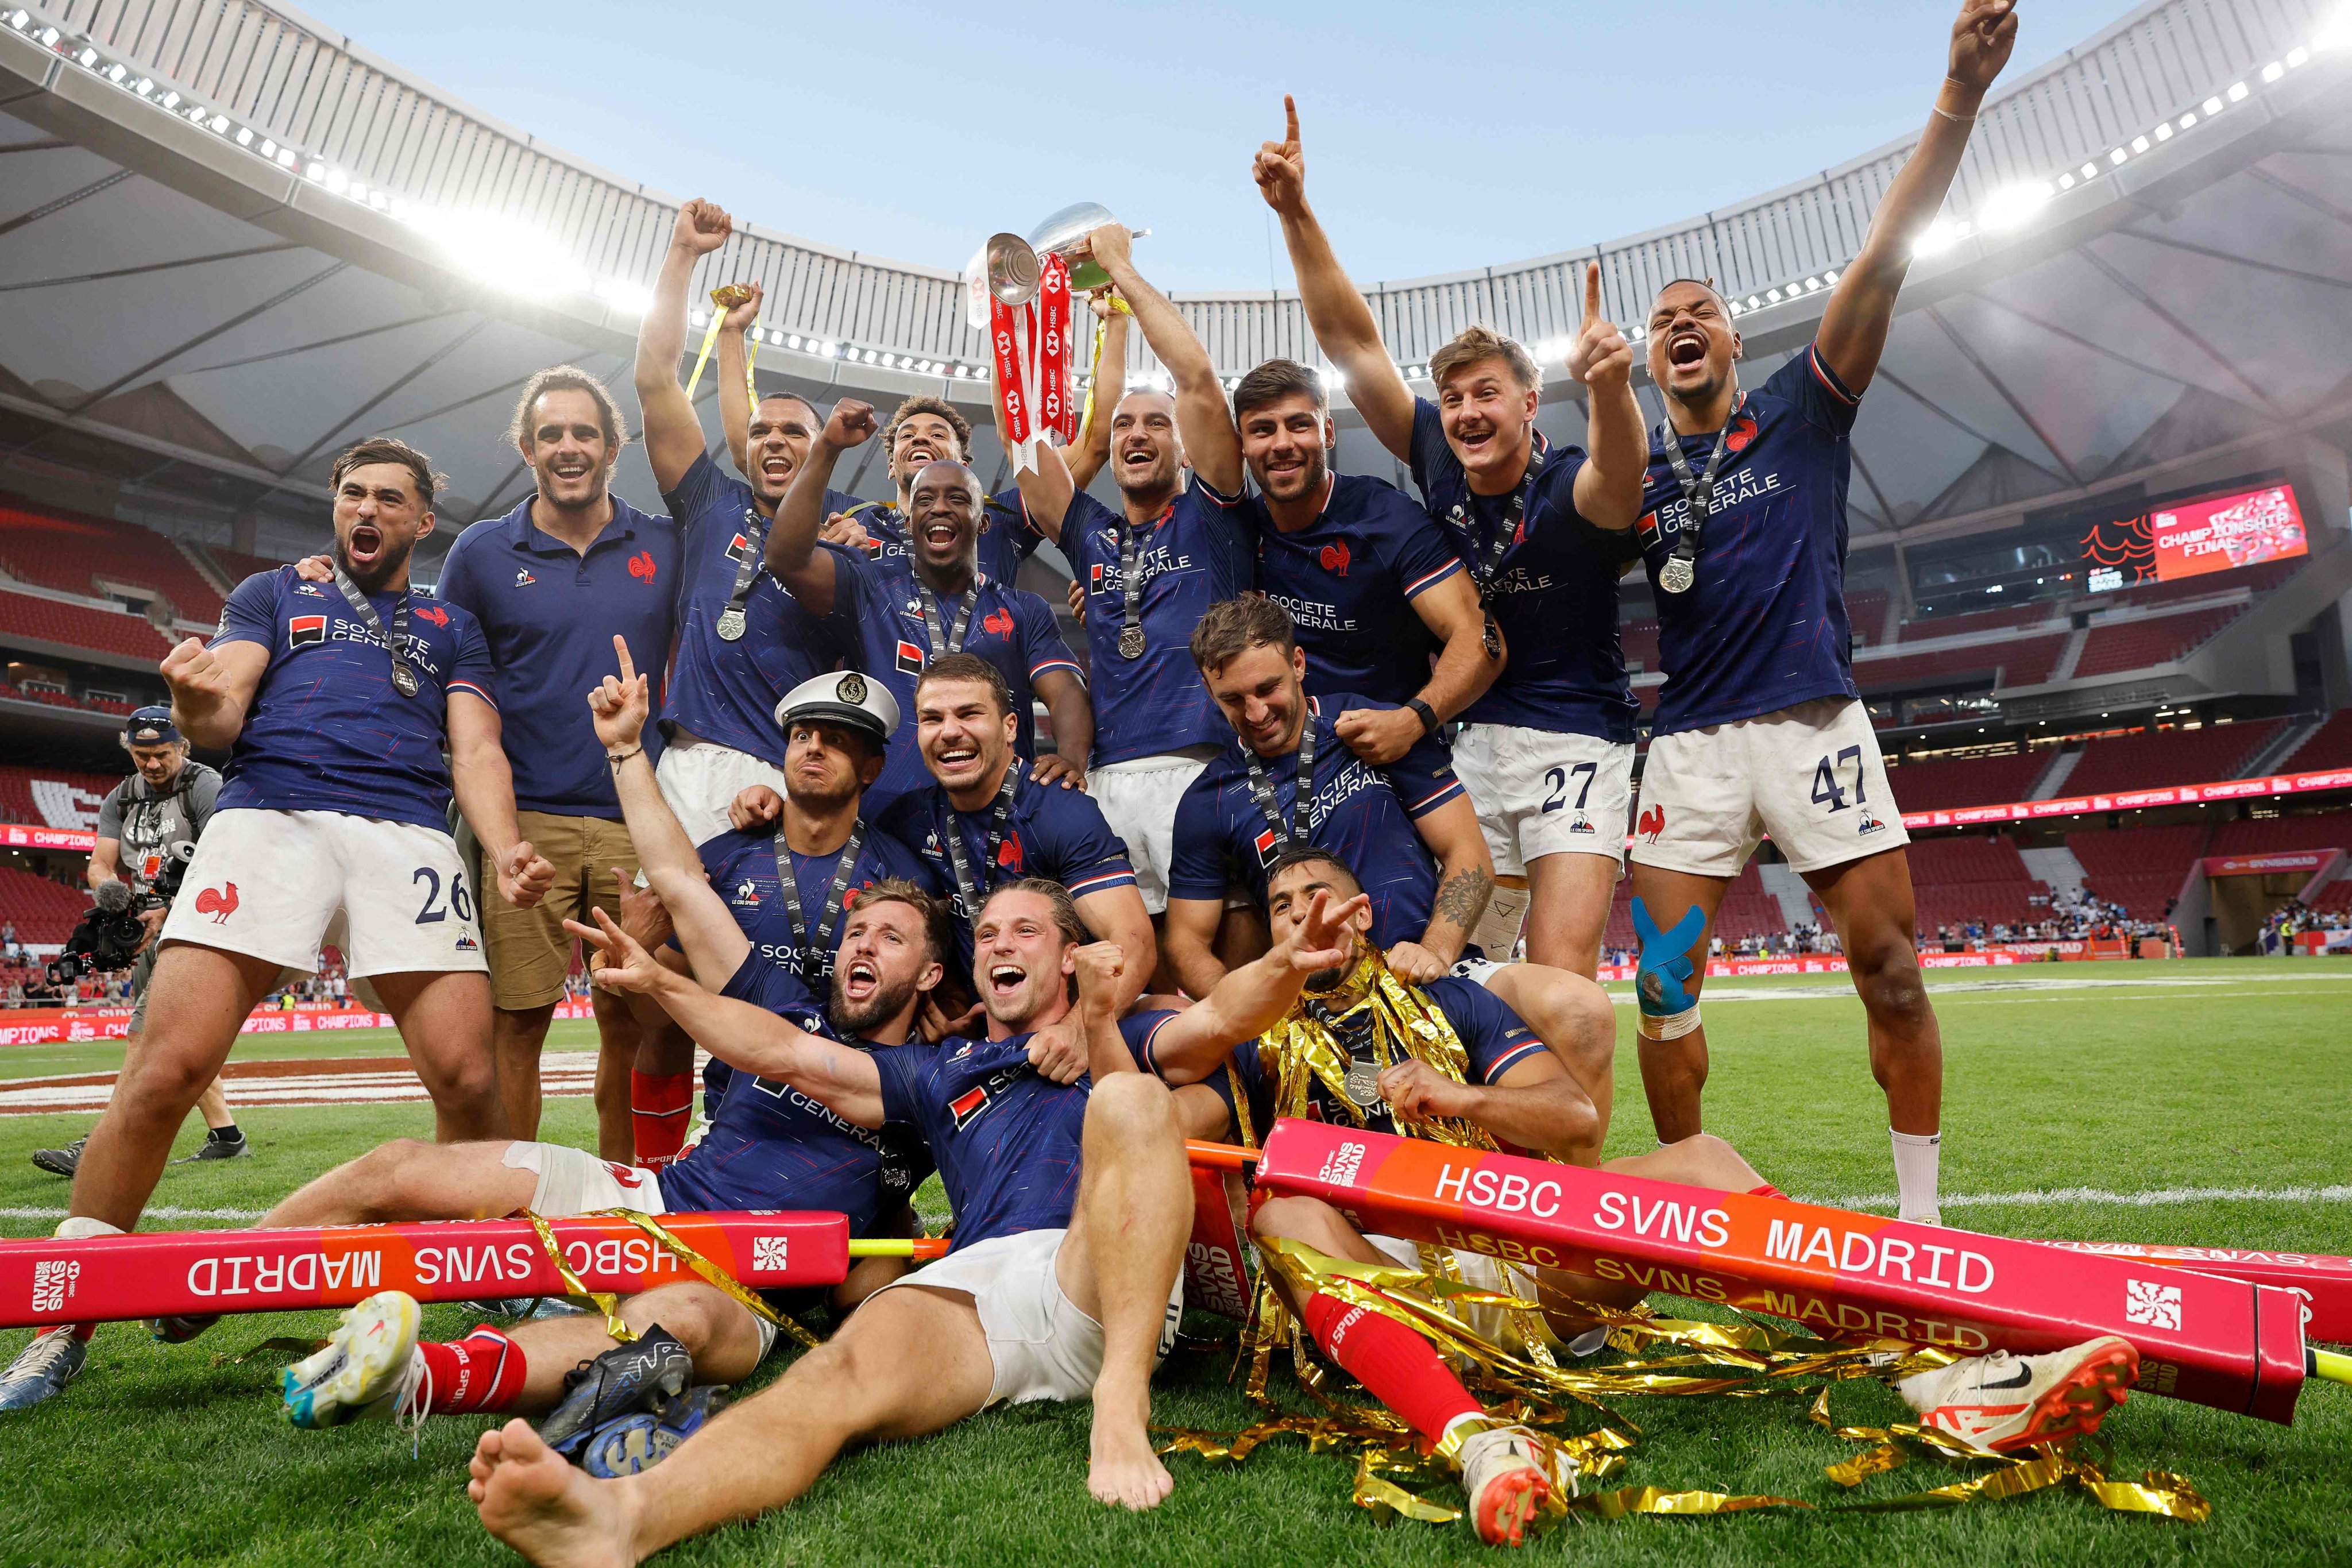 Jubilant France celebrate claiming the HSBC SVNS Series crown in Madrid. Photo: AFP